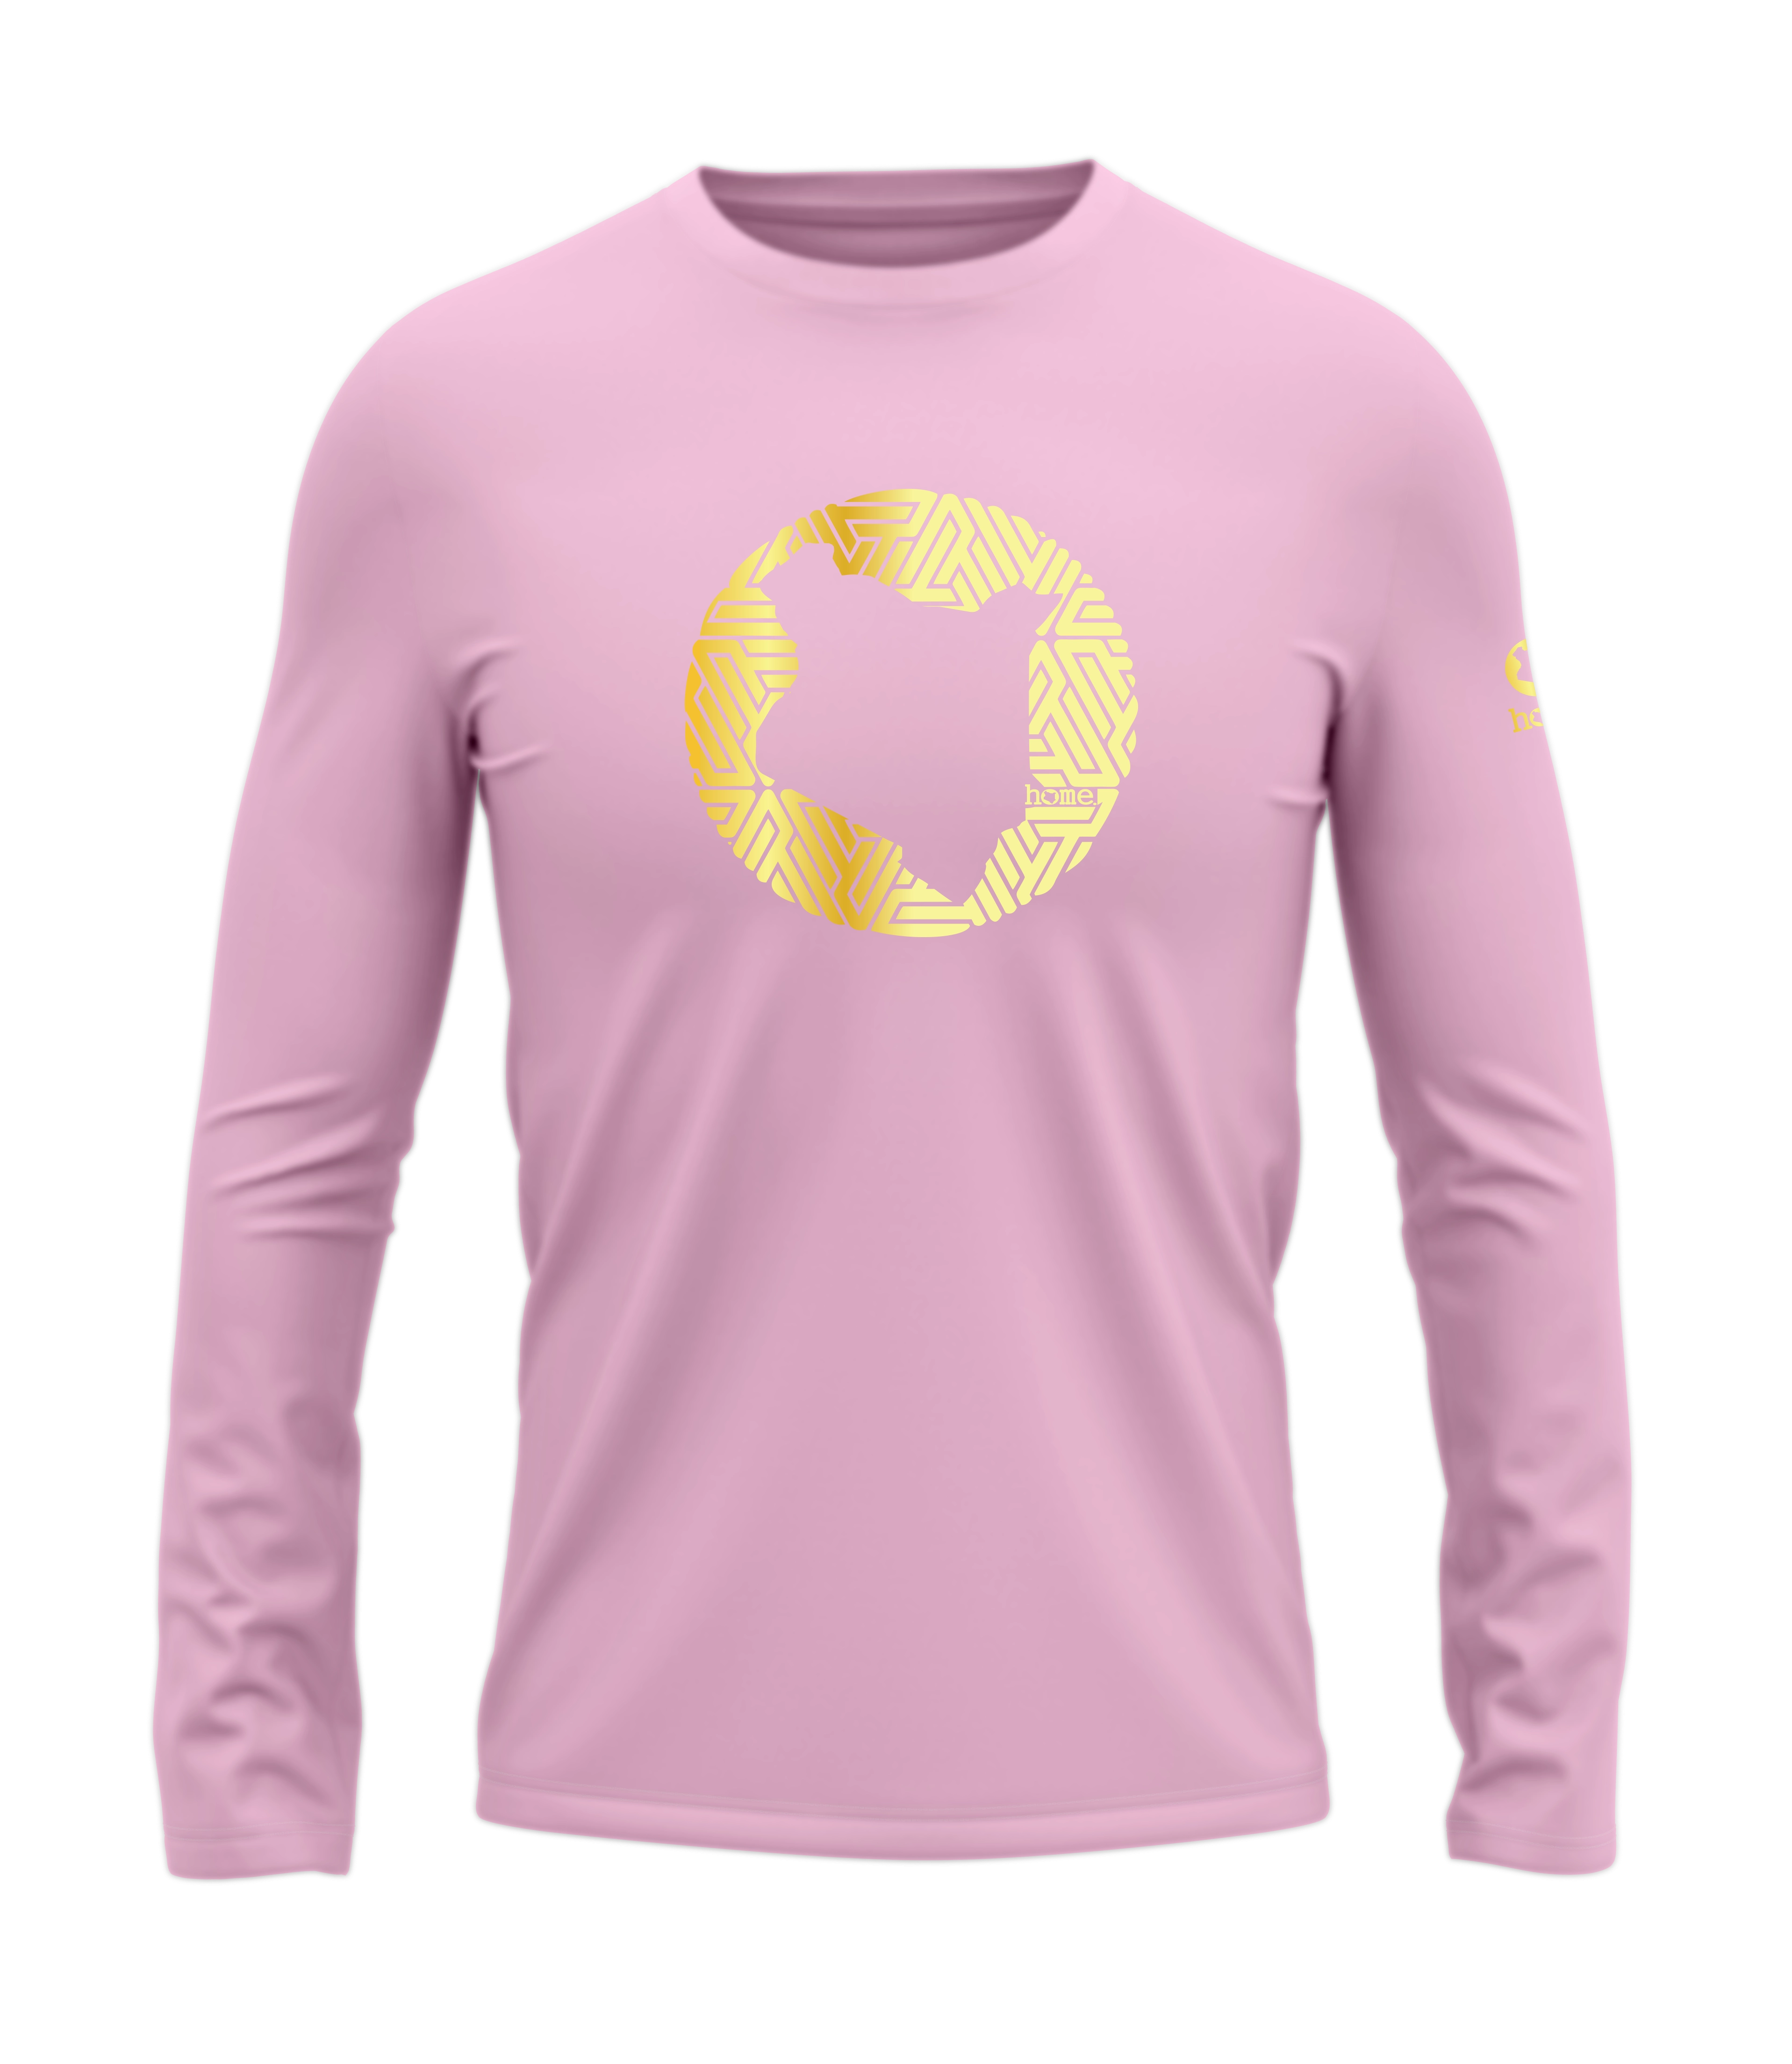 home_254 LONG-SLEEVED PINK T-SHIRT WITH A GOLD MAP PRINT – COTTON PLUS FABRIC